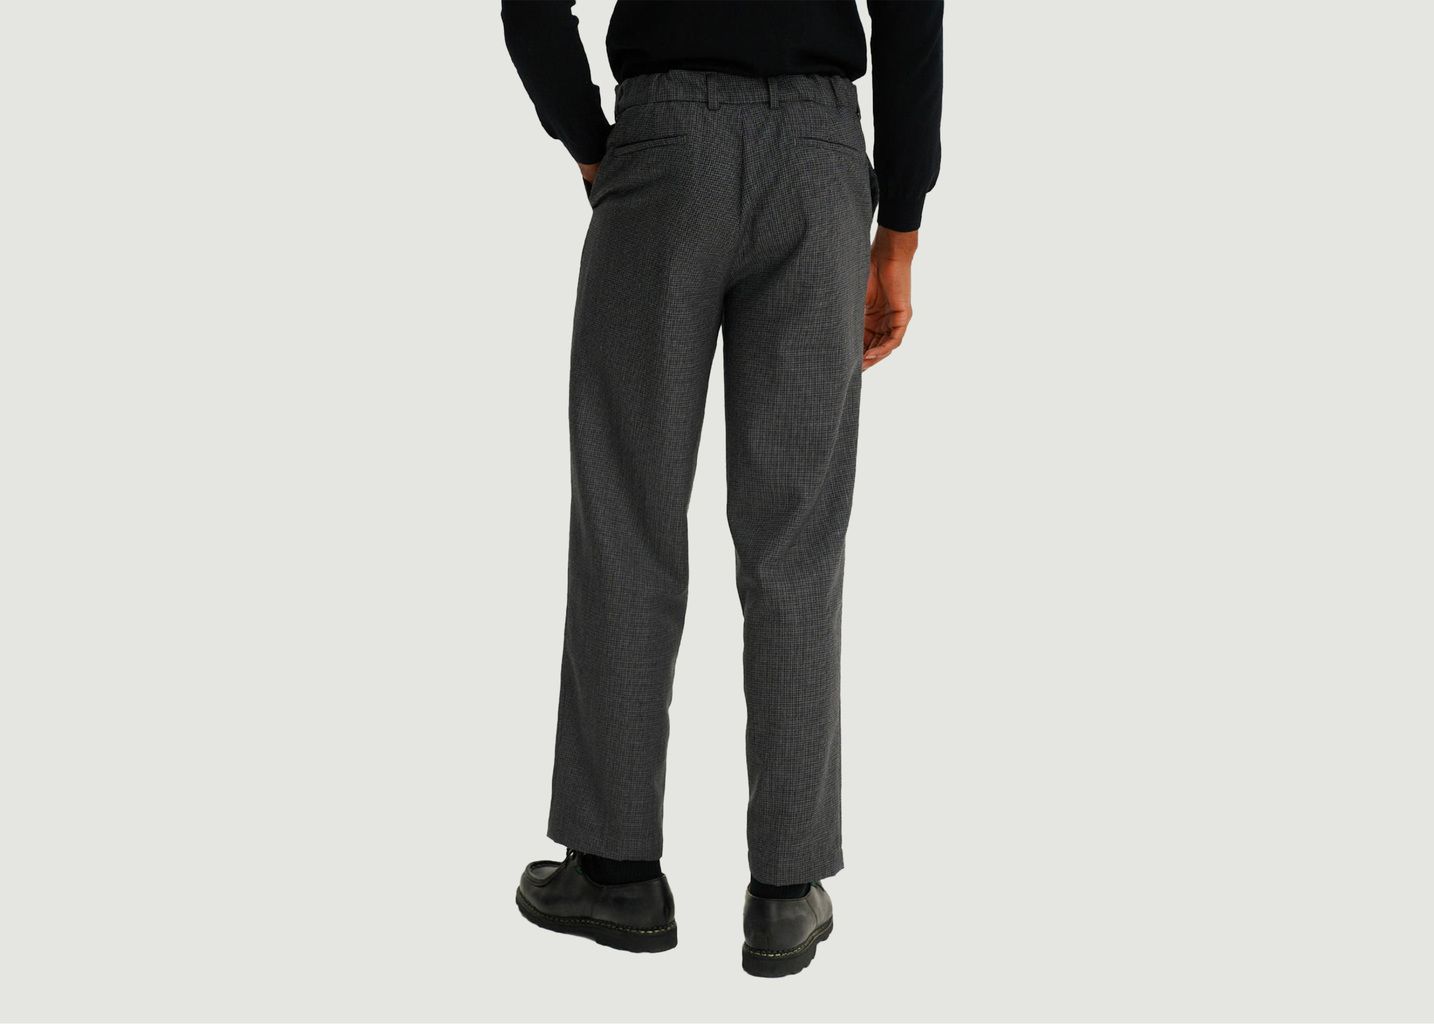 Lepic trousers - noyoco